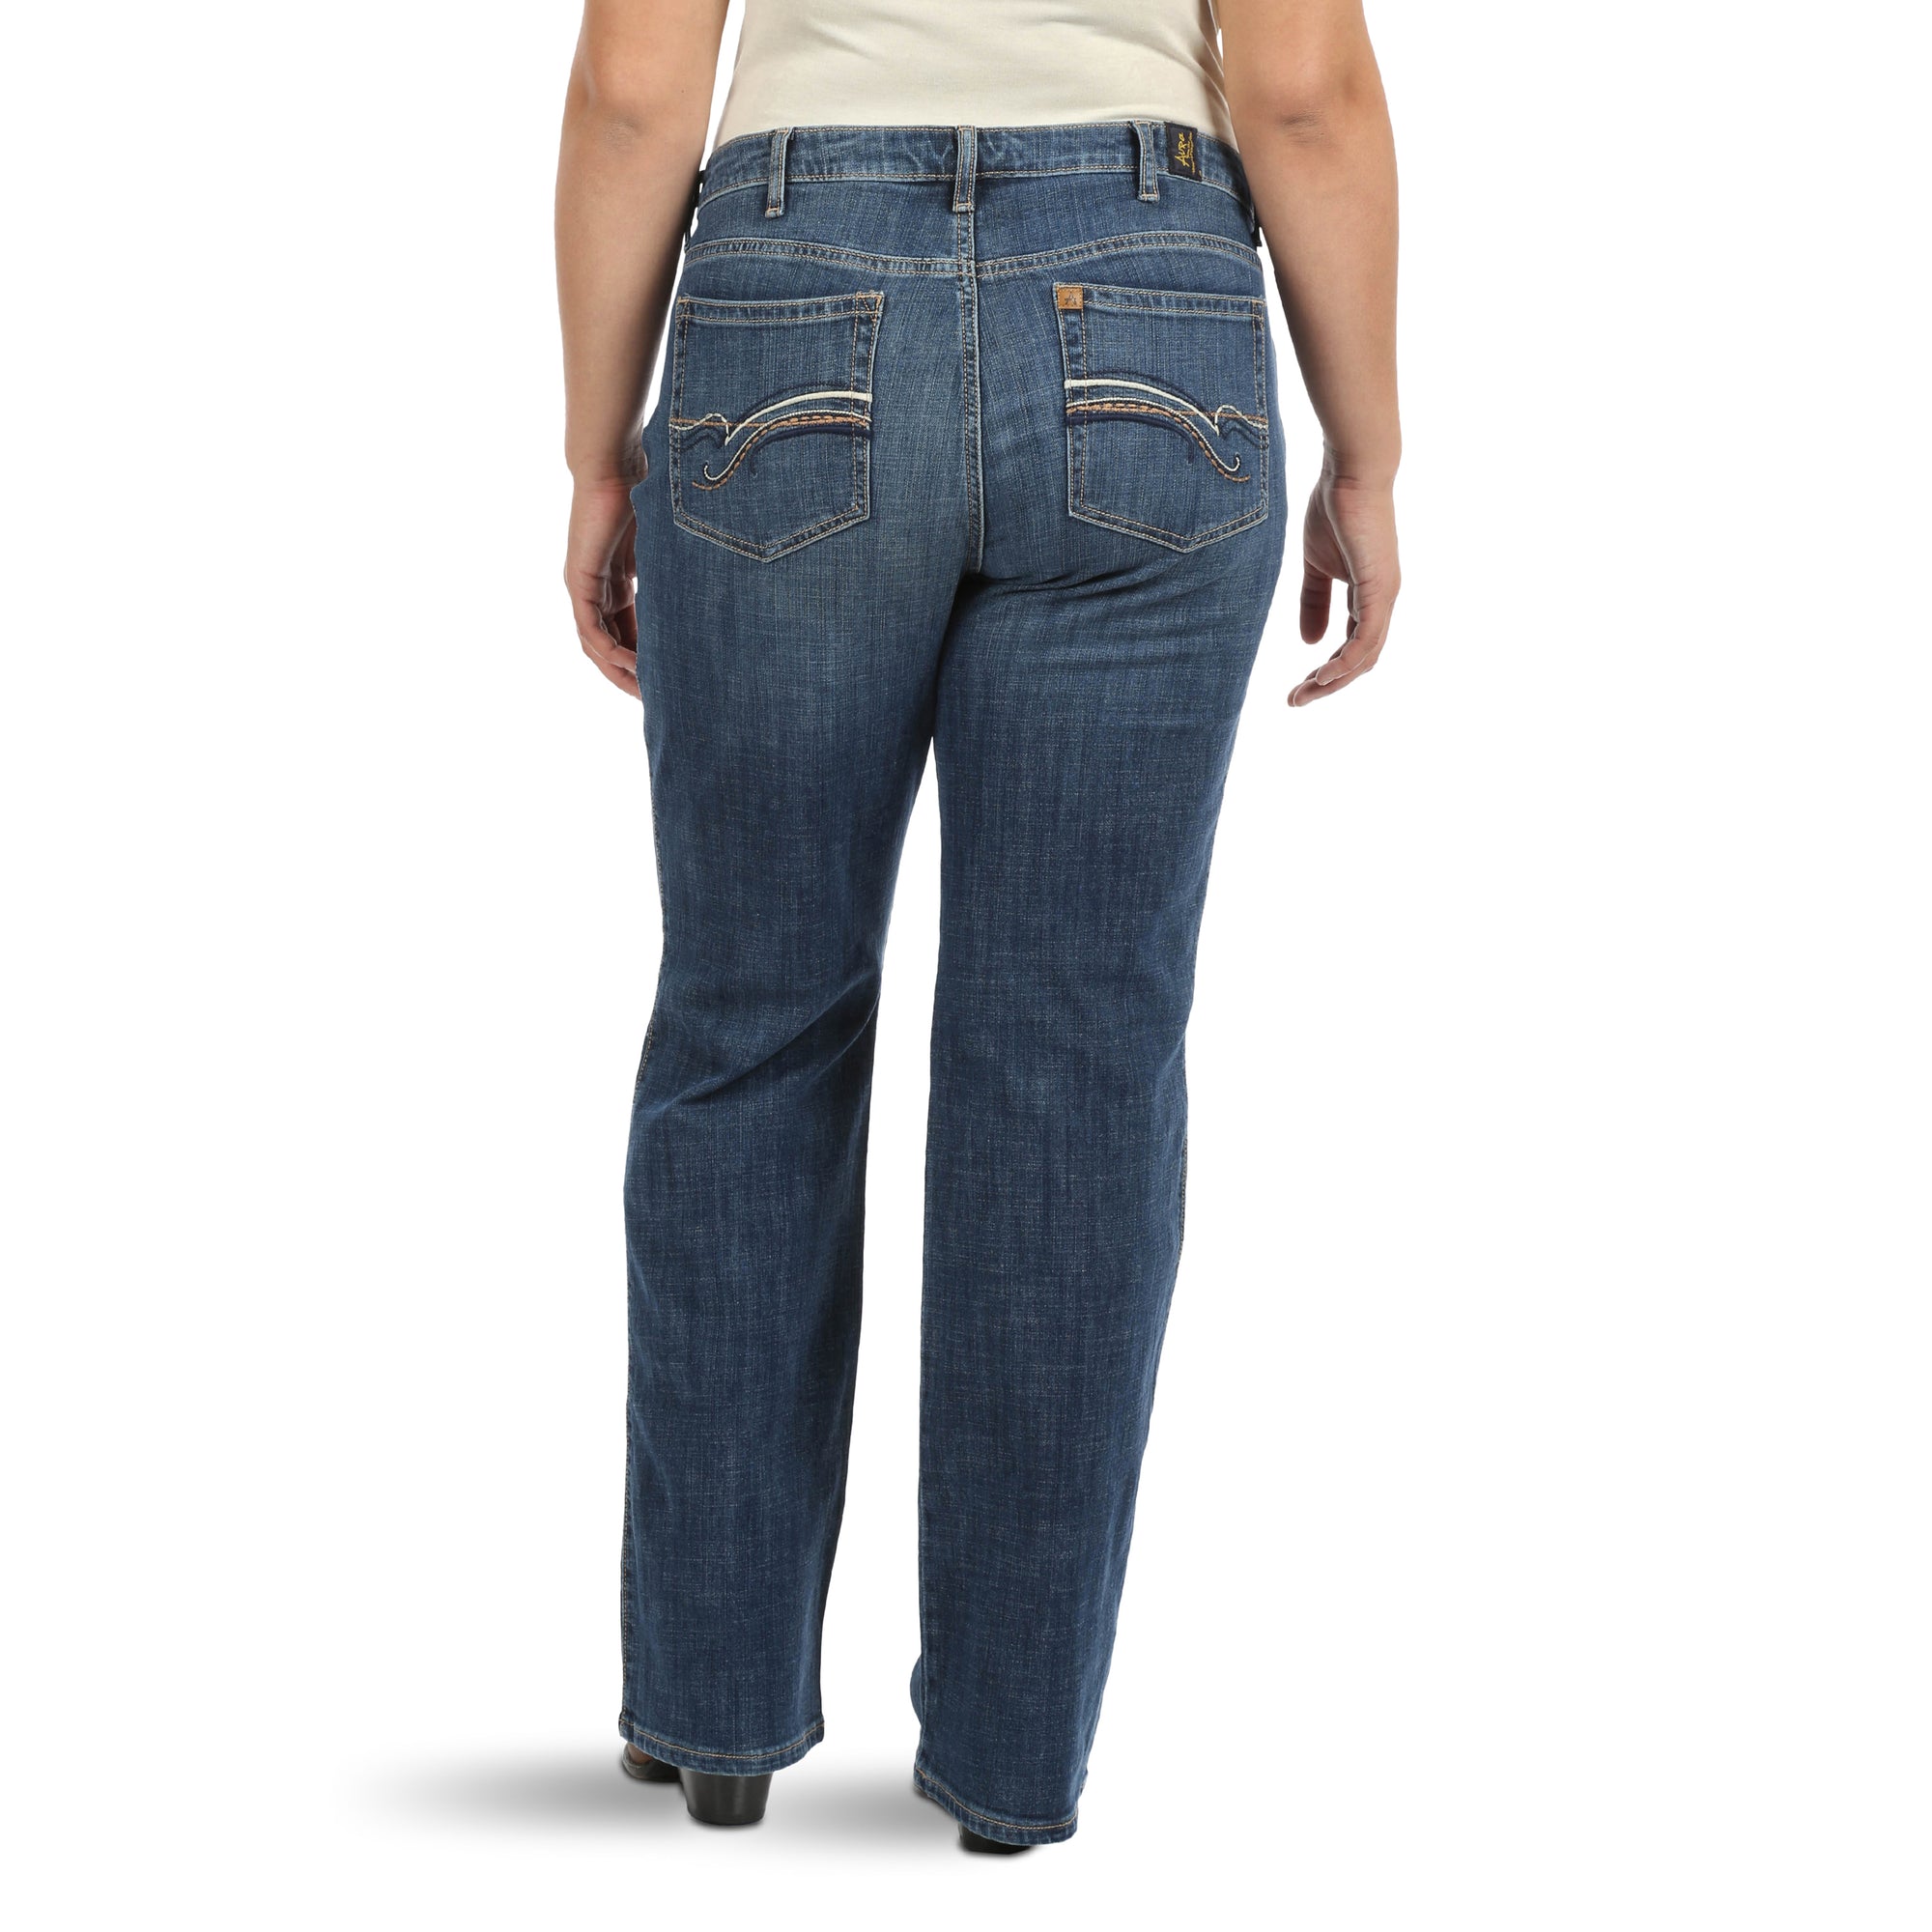 Riders by Lee, Jeans, Riders By Lee Ladies Tummy Control Blue Jeans